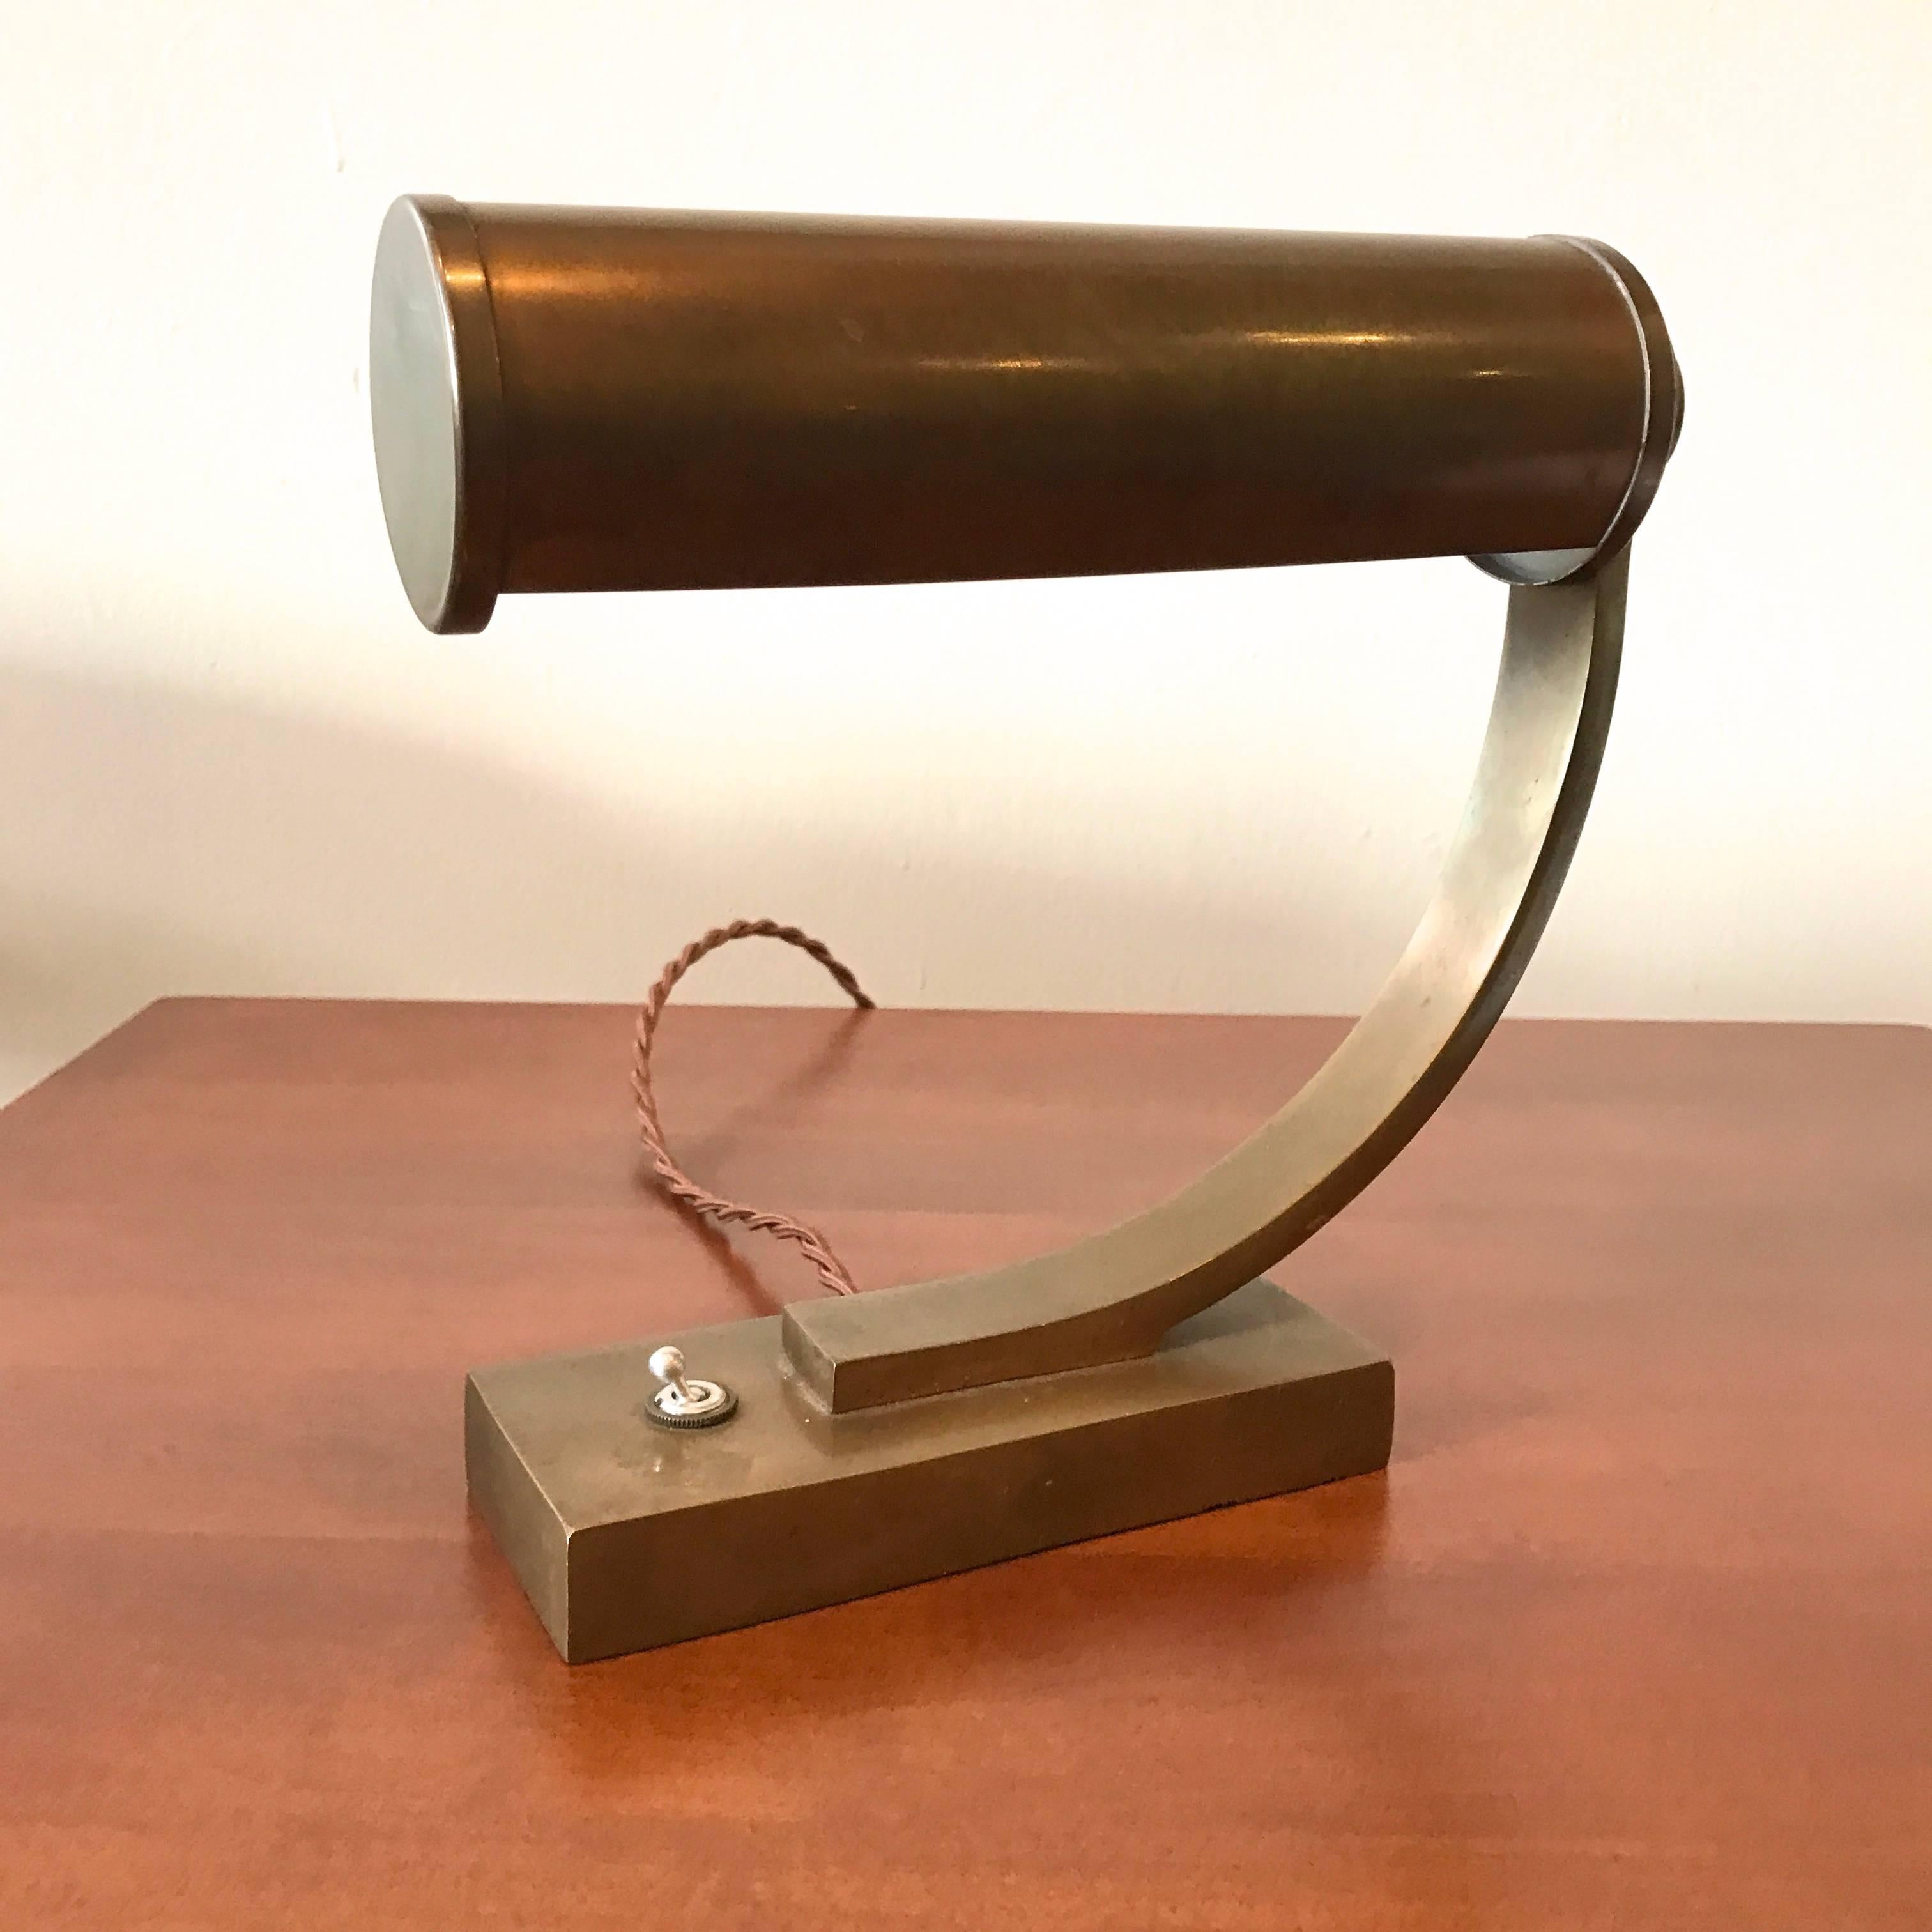 Brass Machine Age design desk lamp with a cylindrical adjustable shade resting on a weighed plinth base with a toggle switch and newly rewired. Great soft lustre patina to brass finish.